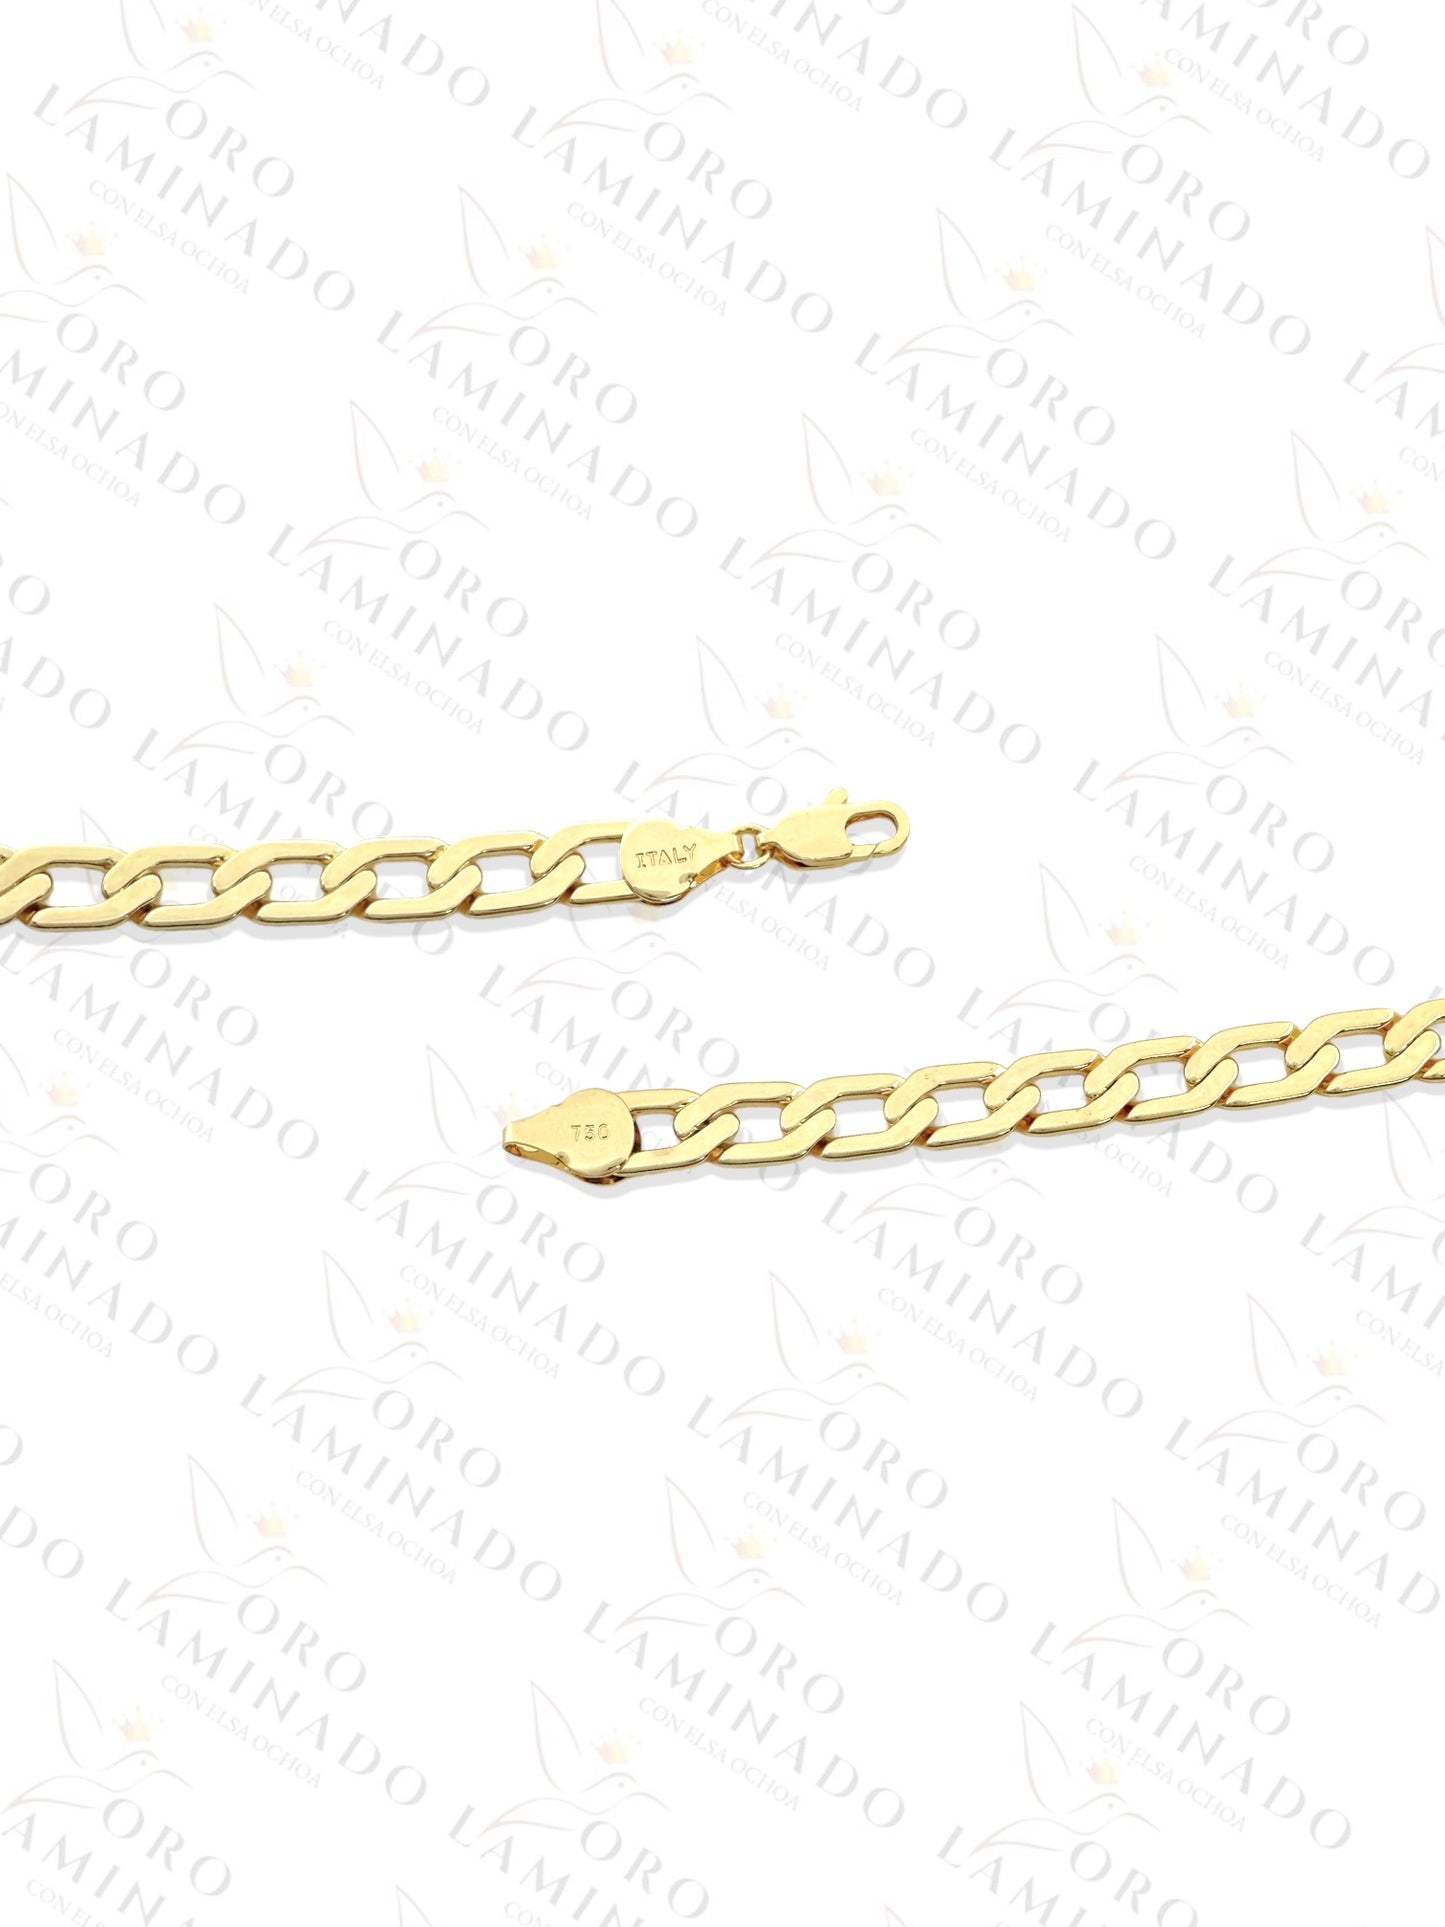 Squared Cuban Chains Pack of 6 Size 20" 8mm R280